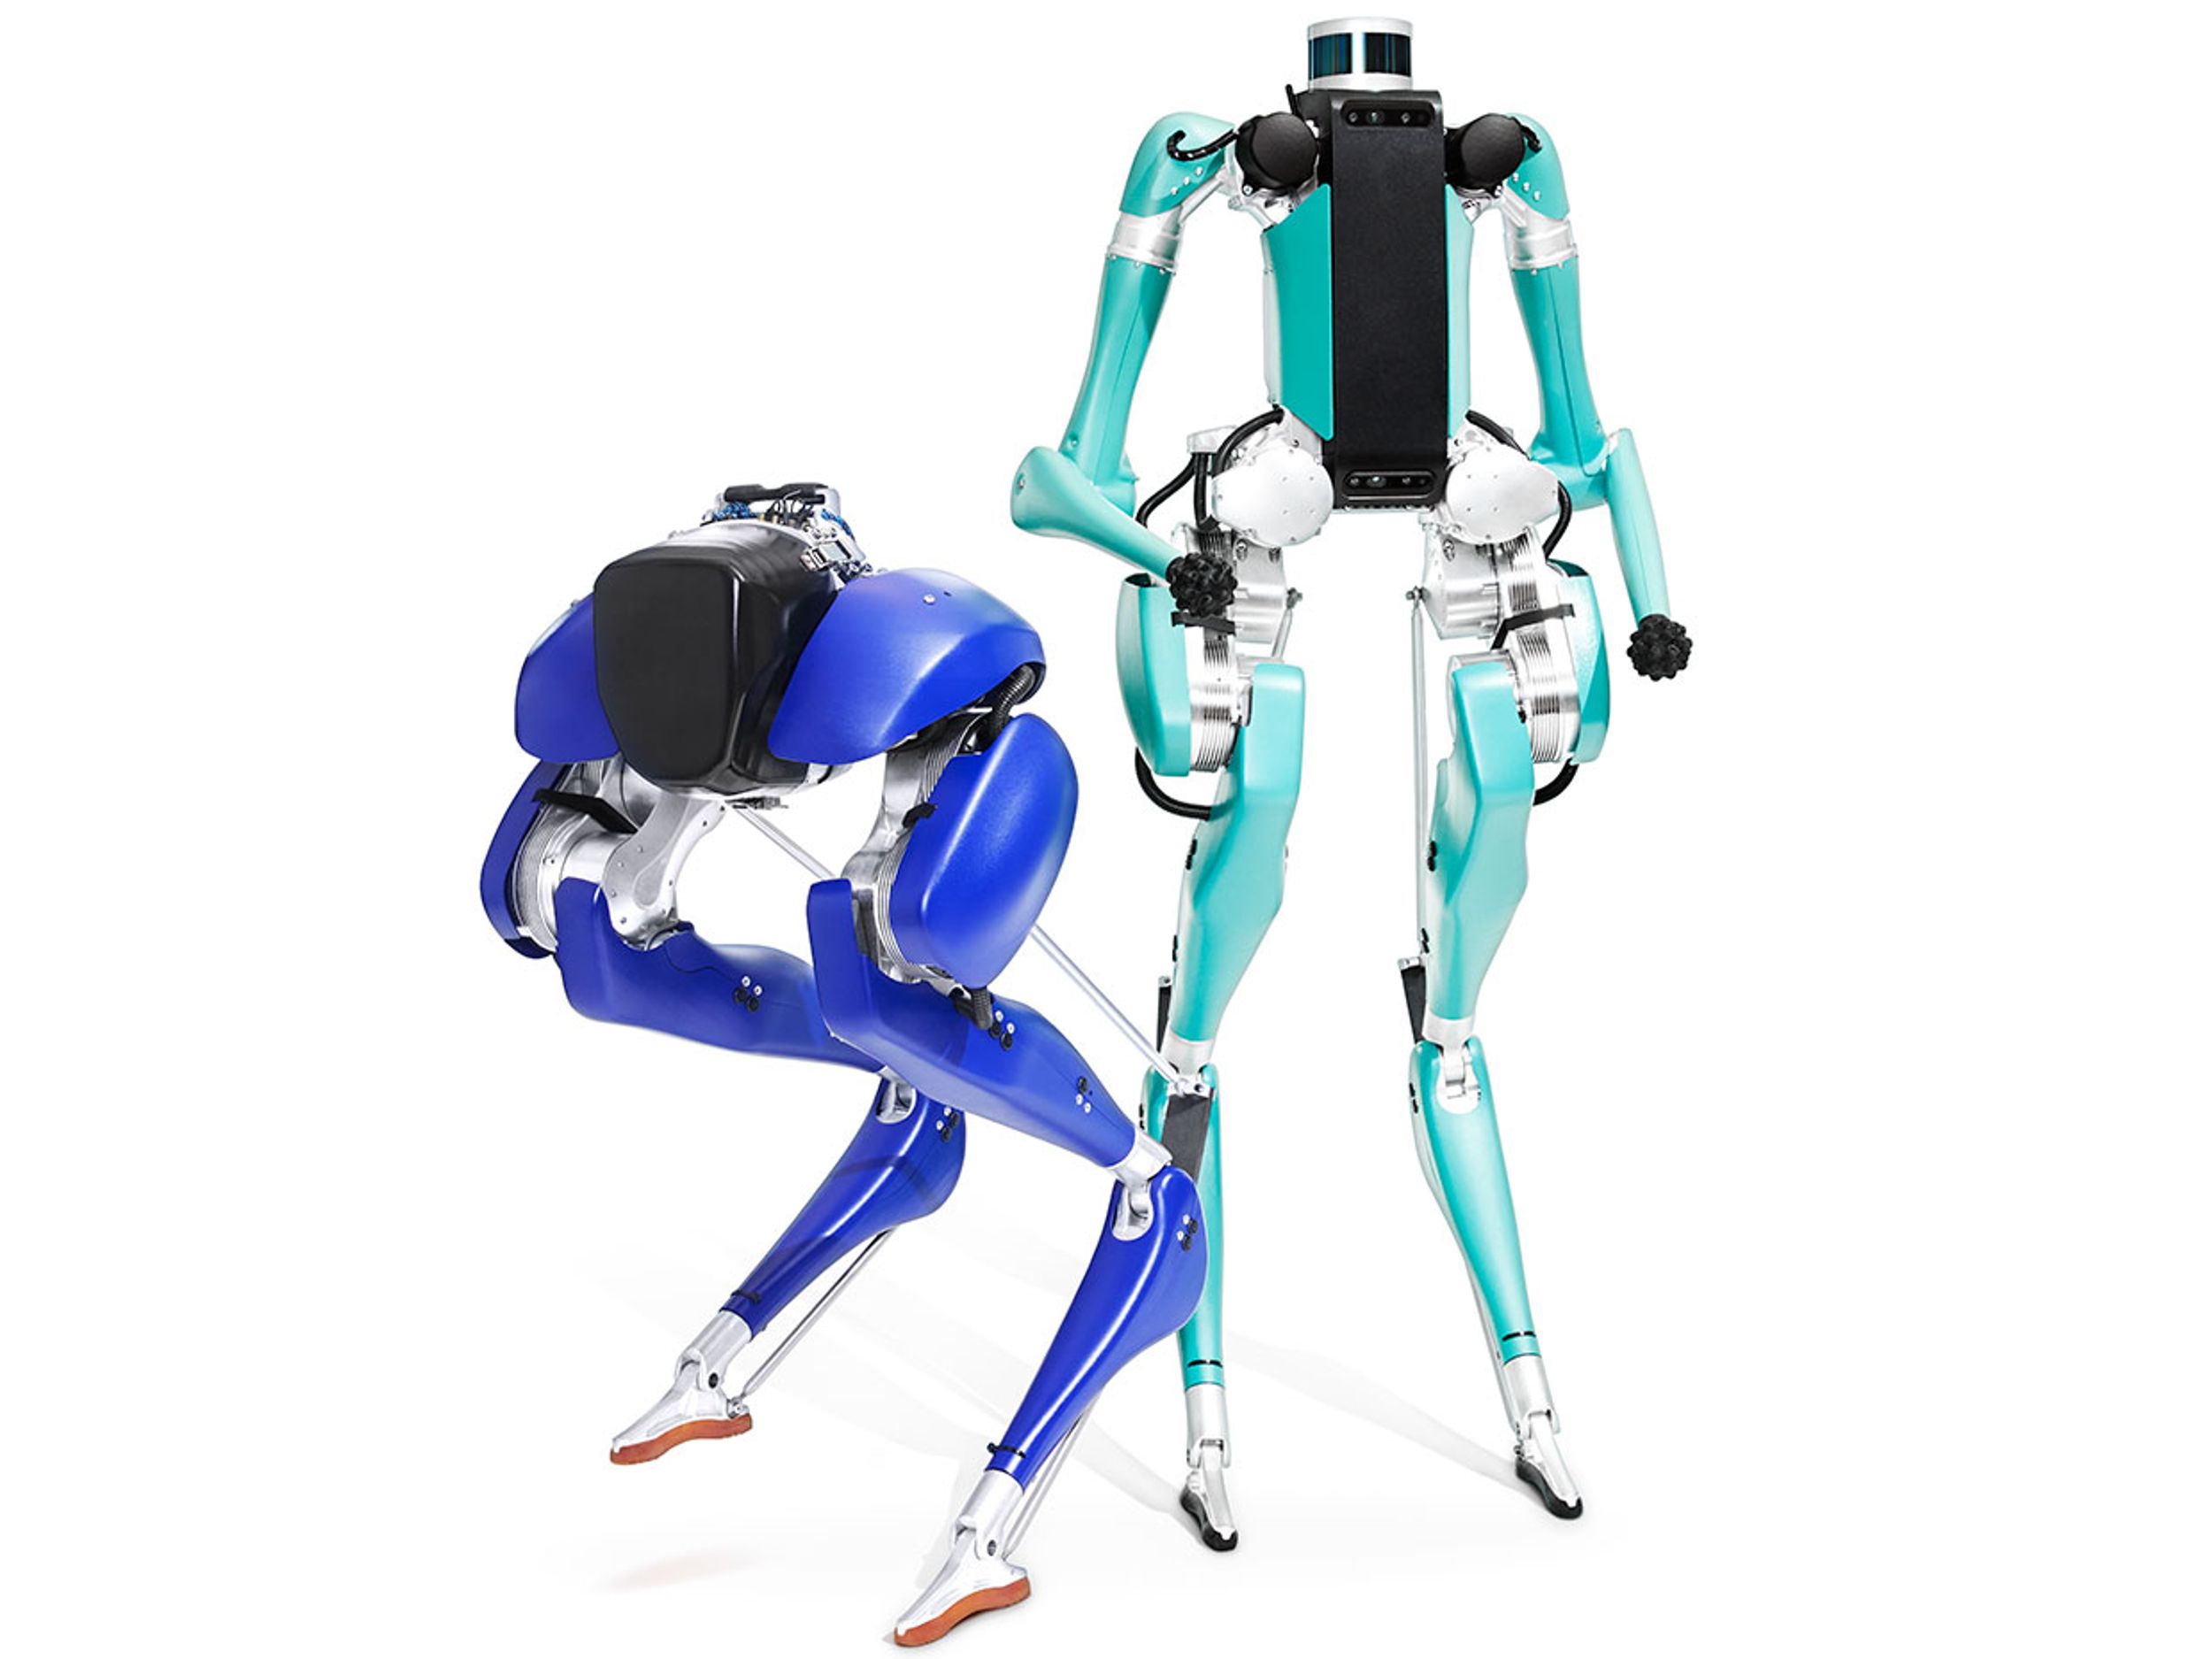 Agility Robotics designed its legged robots Cassie [left] and Digit to move in a more dynamic fashion than regular robots do.